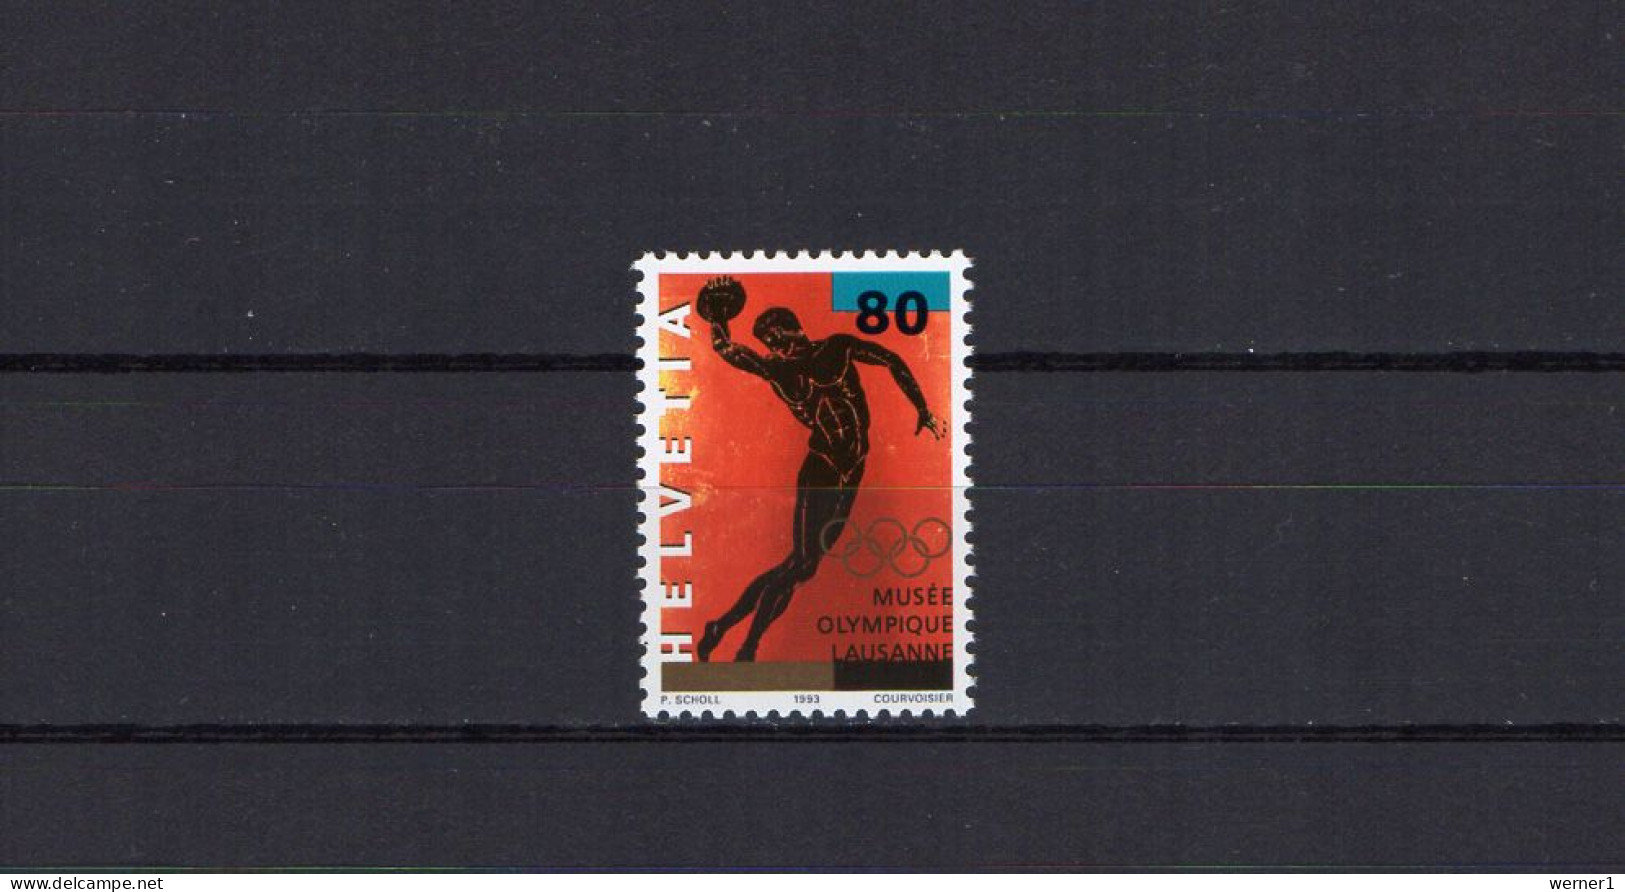 Switzerland 1993 Olympic Games Stamp MNH - Ete 1992: Barcelone